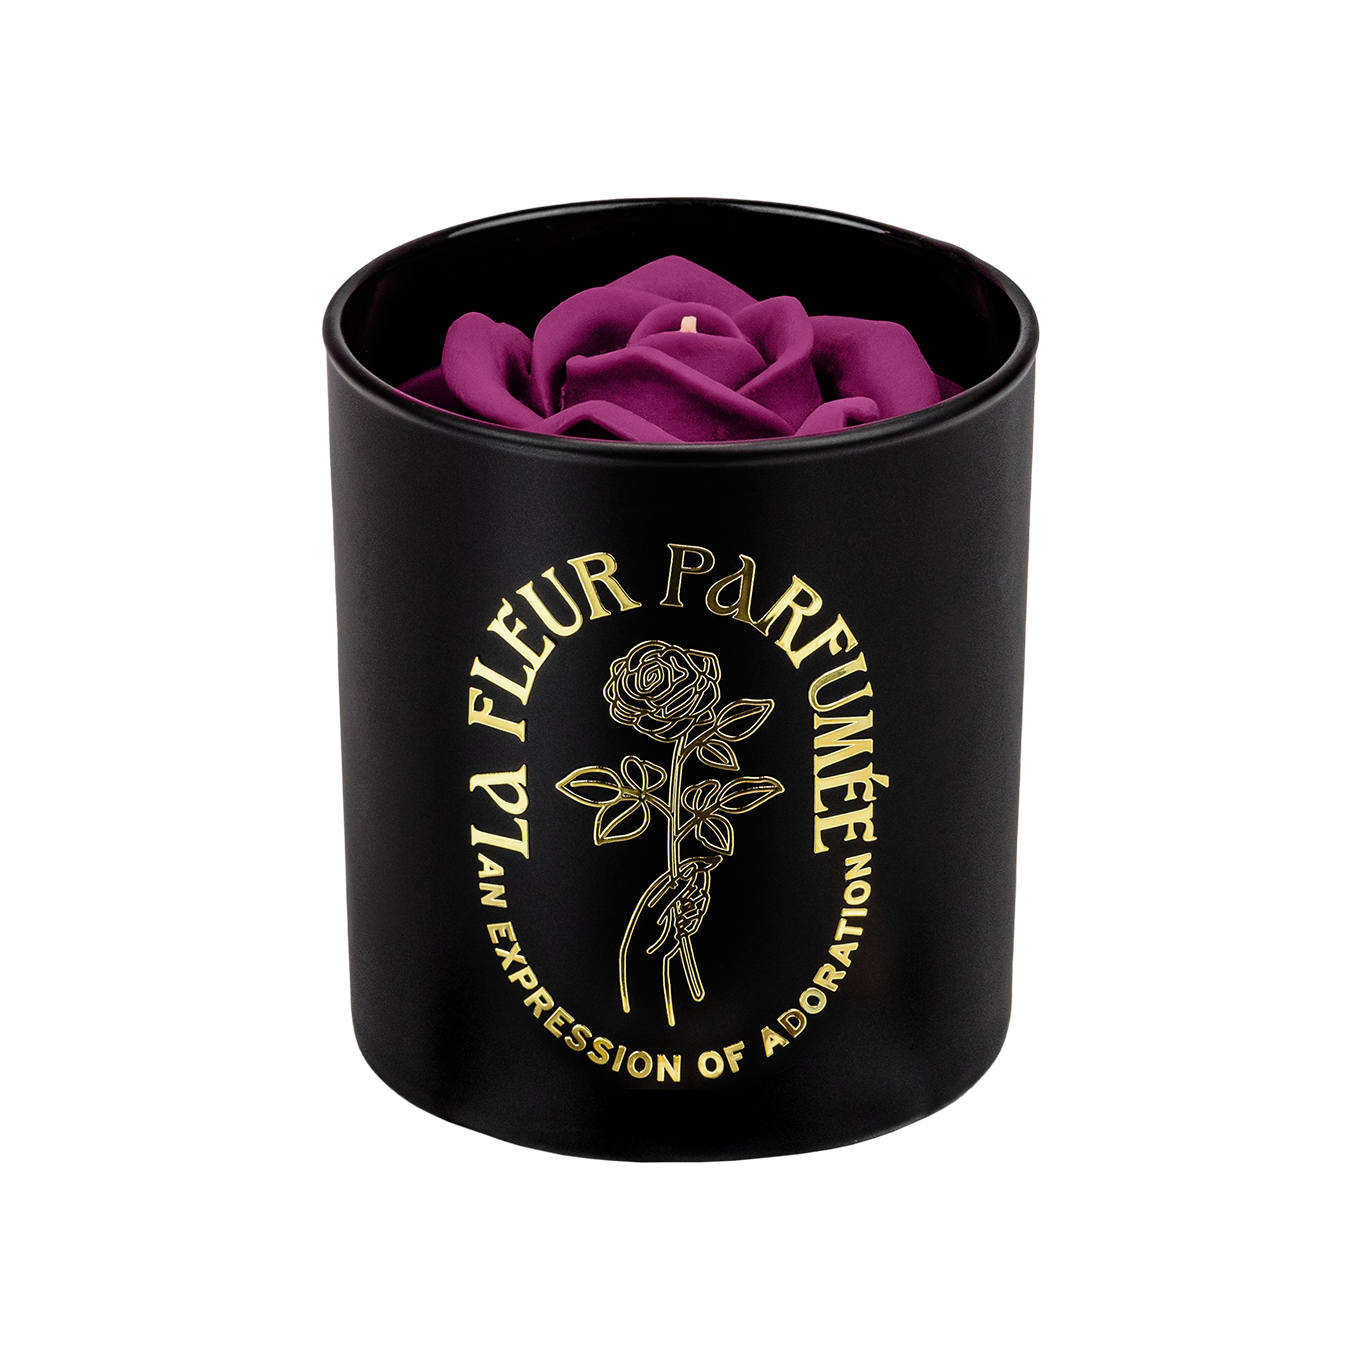 An elegant luxurious black candle with a gold emblem that reads La Fleur Parfumée An Expression of Adoration, and is topped with a purple sculpted wax rose 